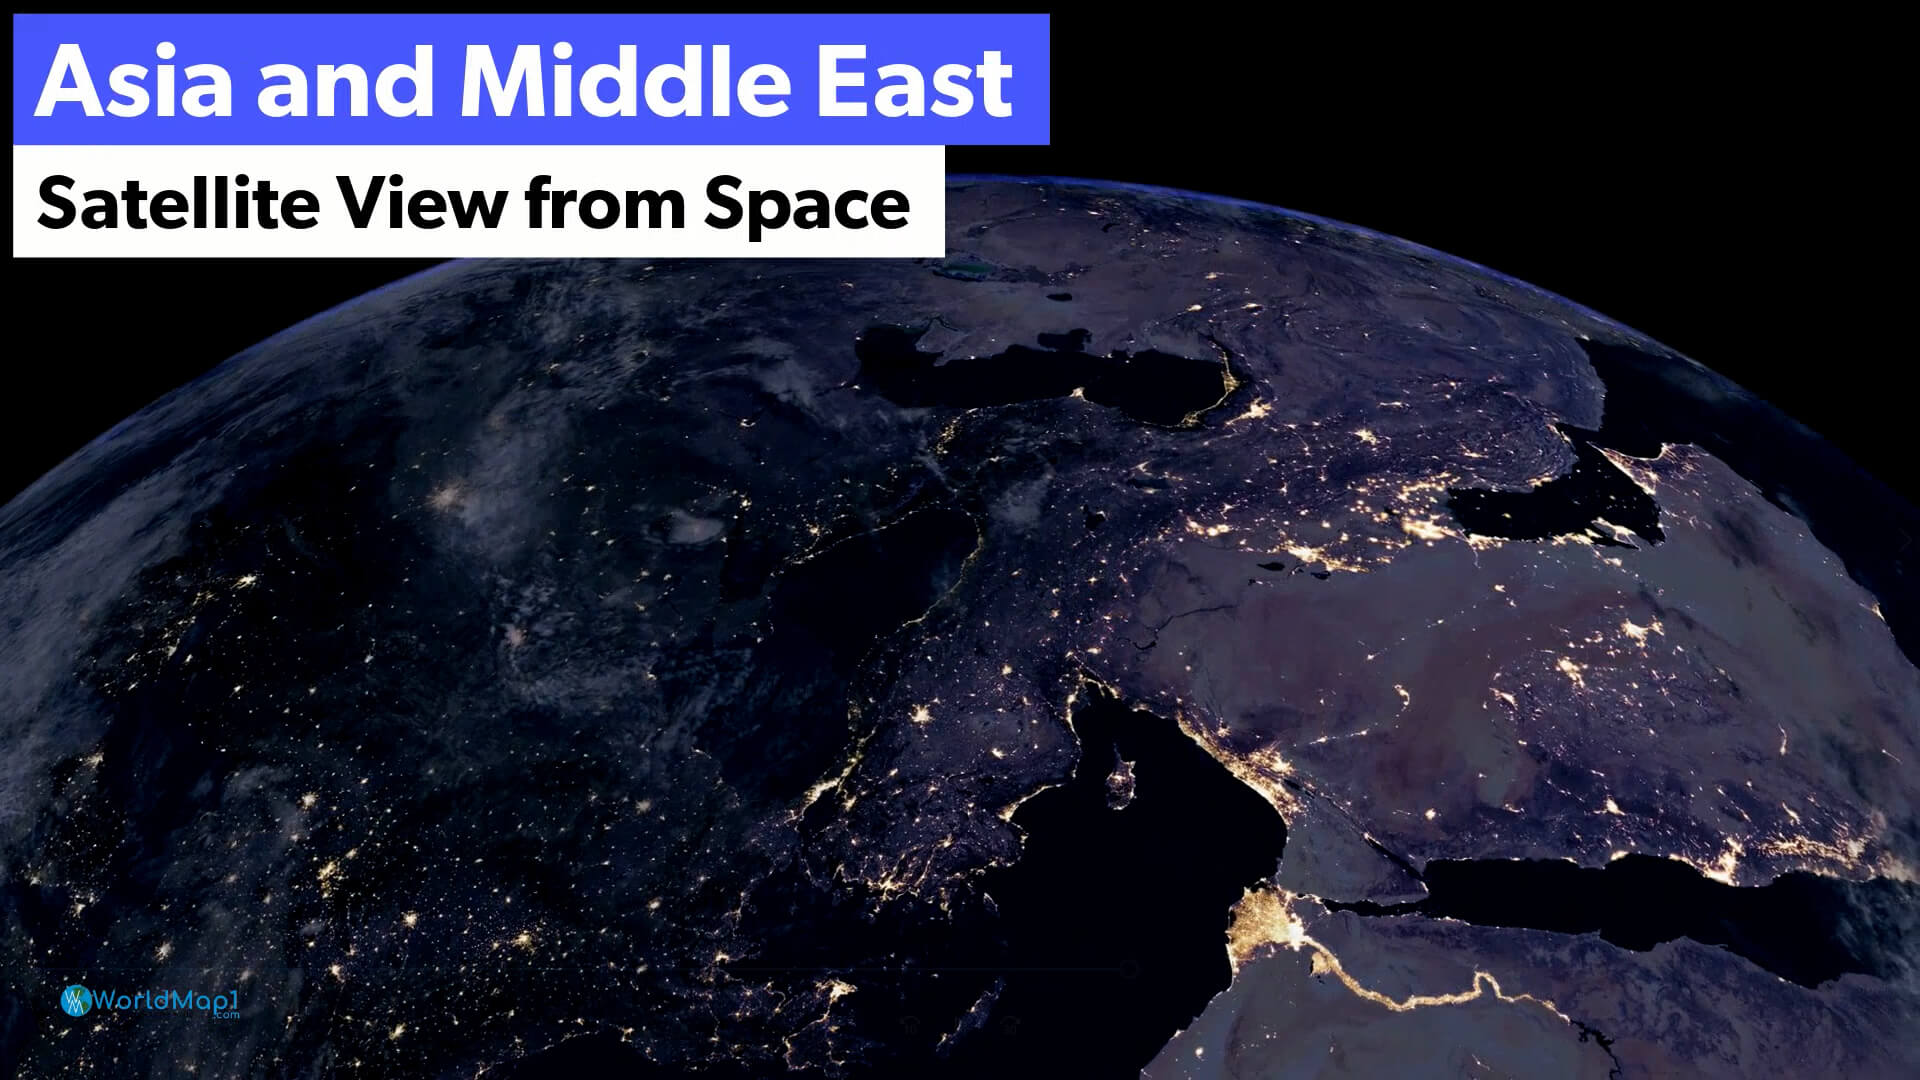 Asia and Middle East Satellite View